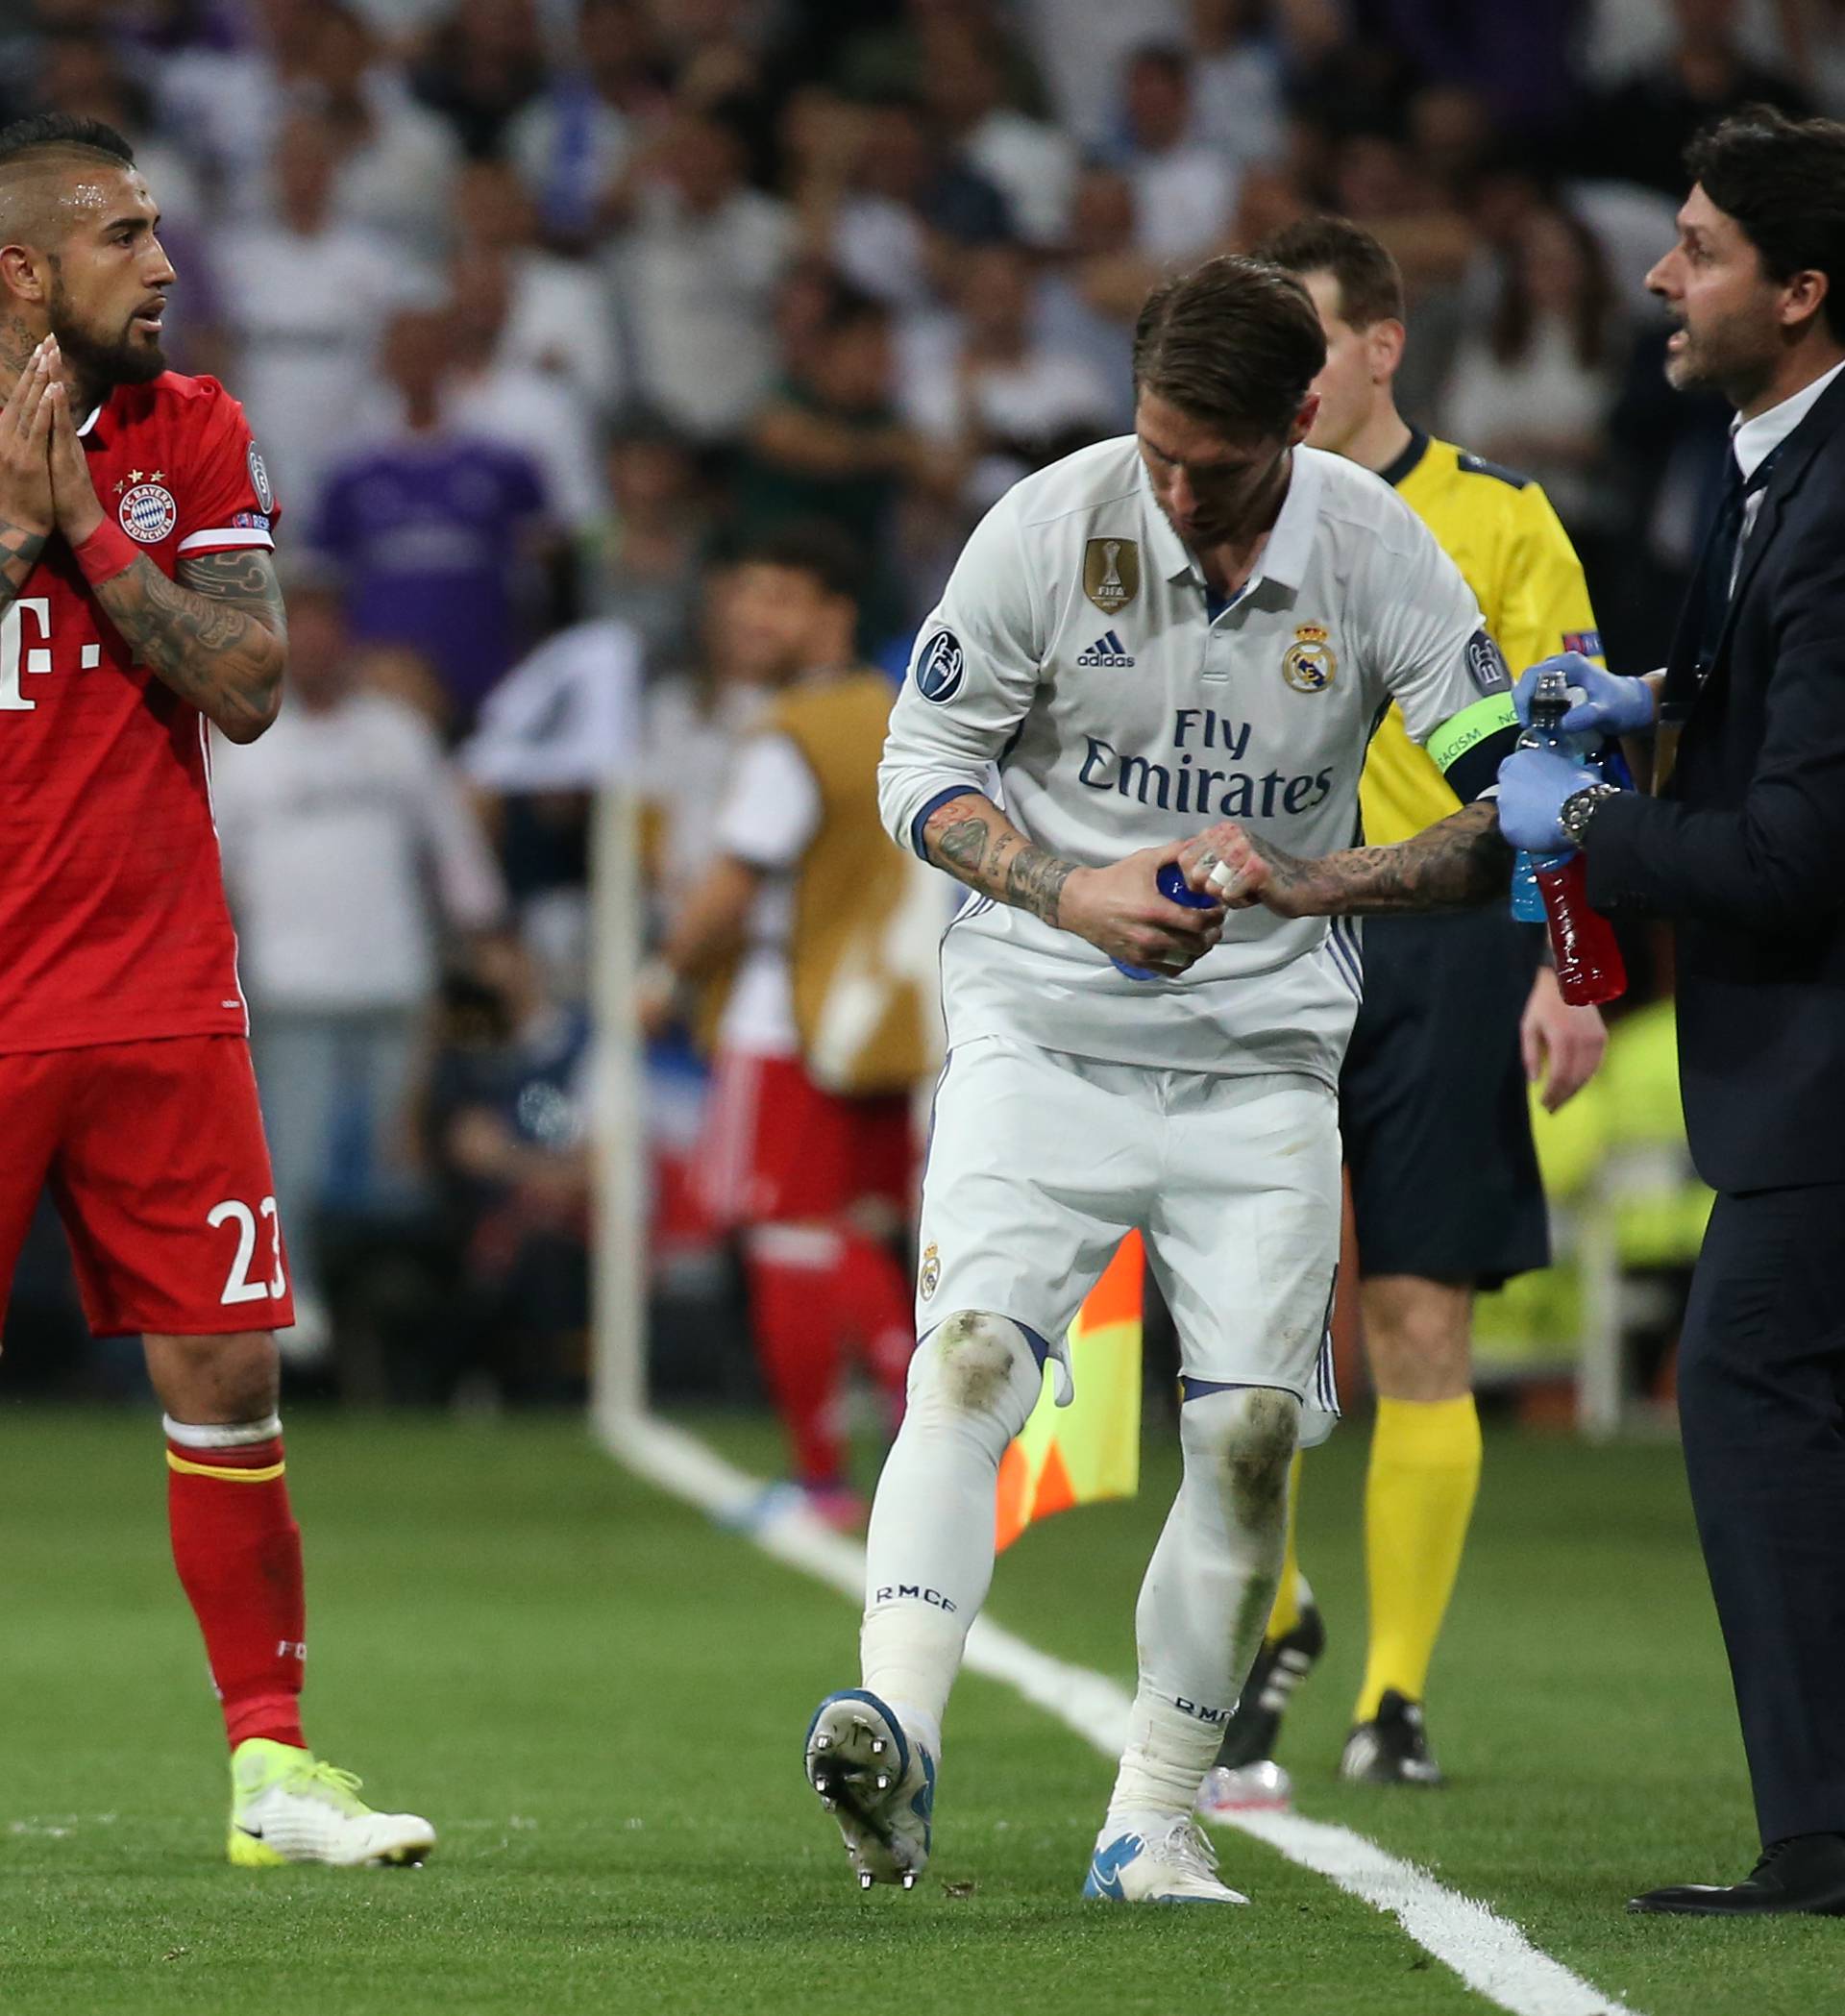 Bayern Munich's Arturo Vidal looks dejected after being sent off as Real Madrid's Sergio Ramos looks on